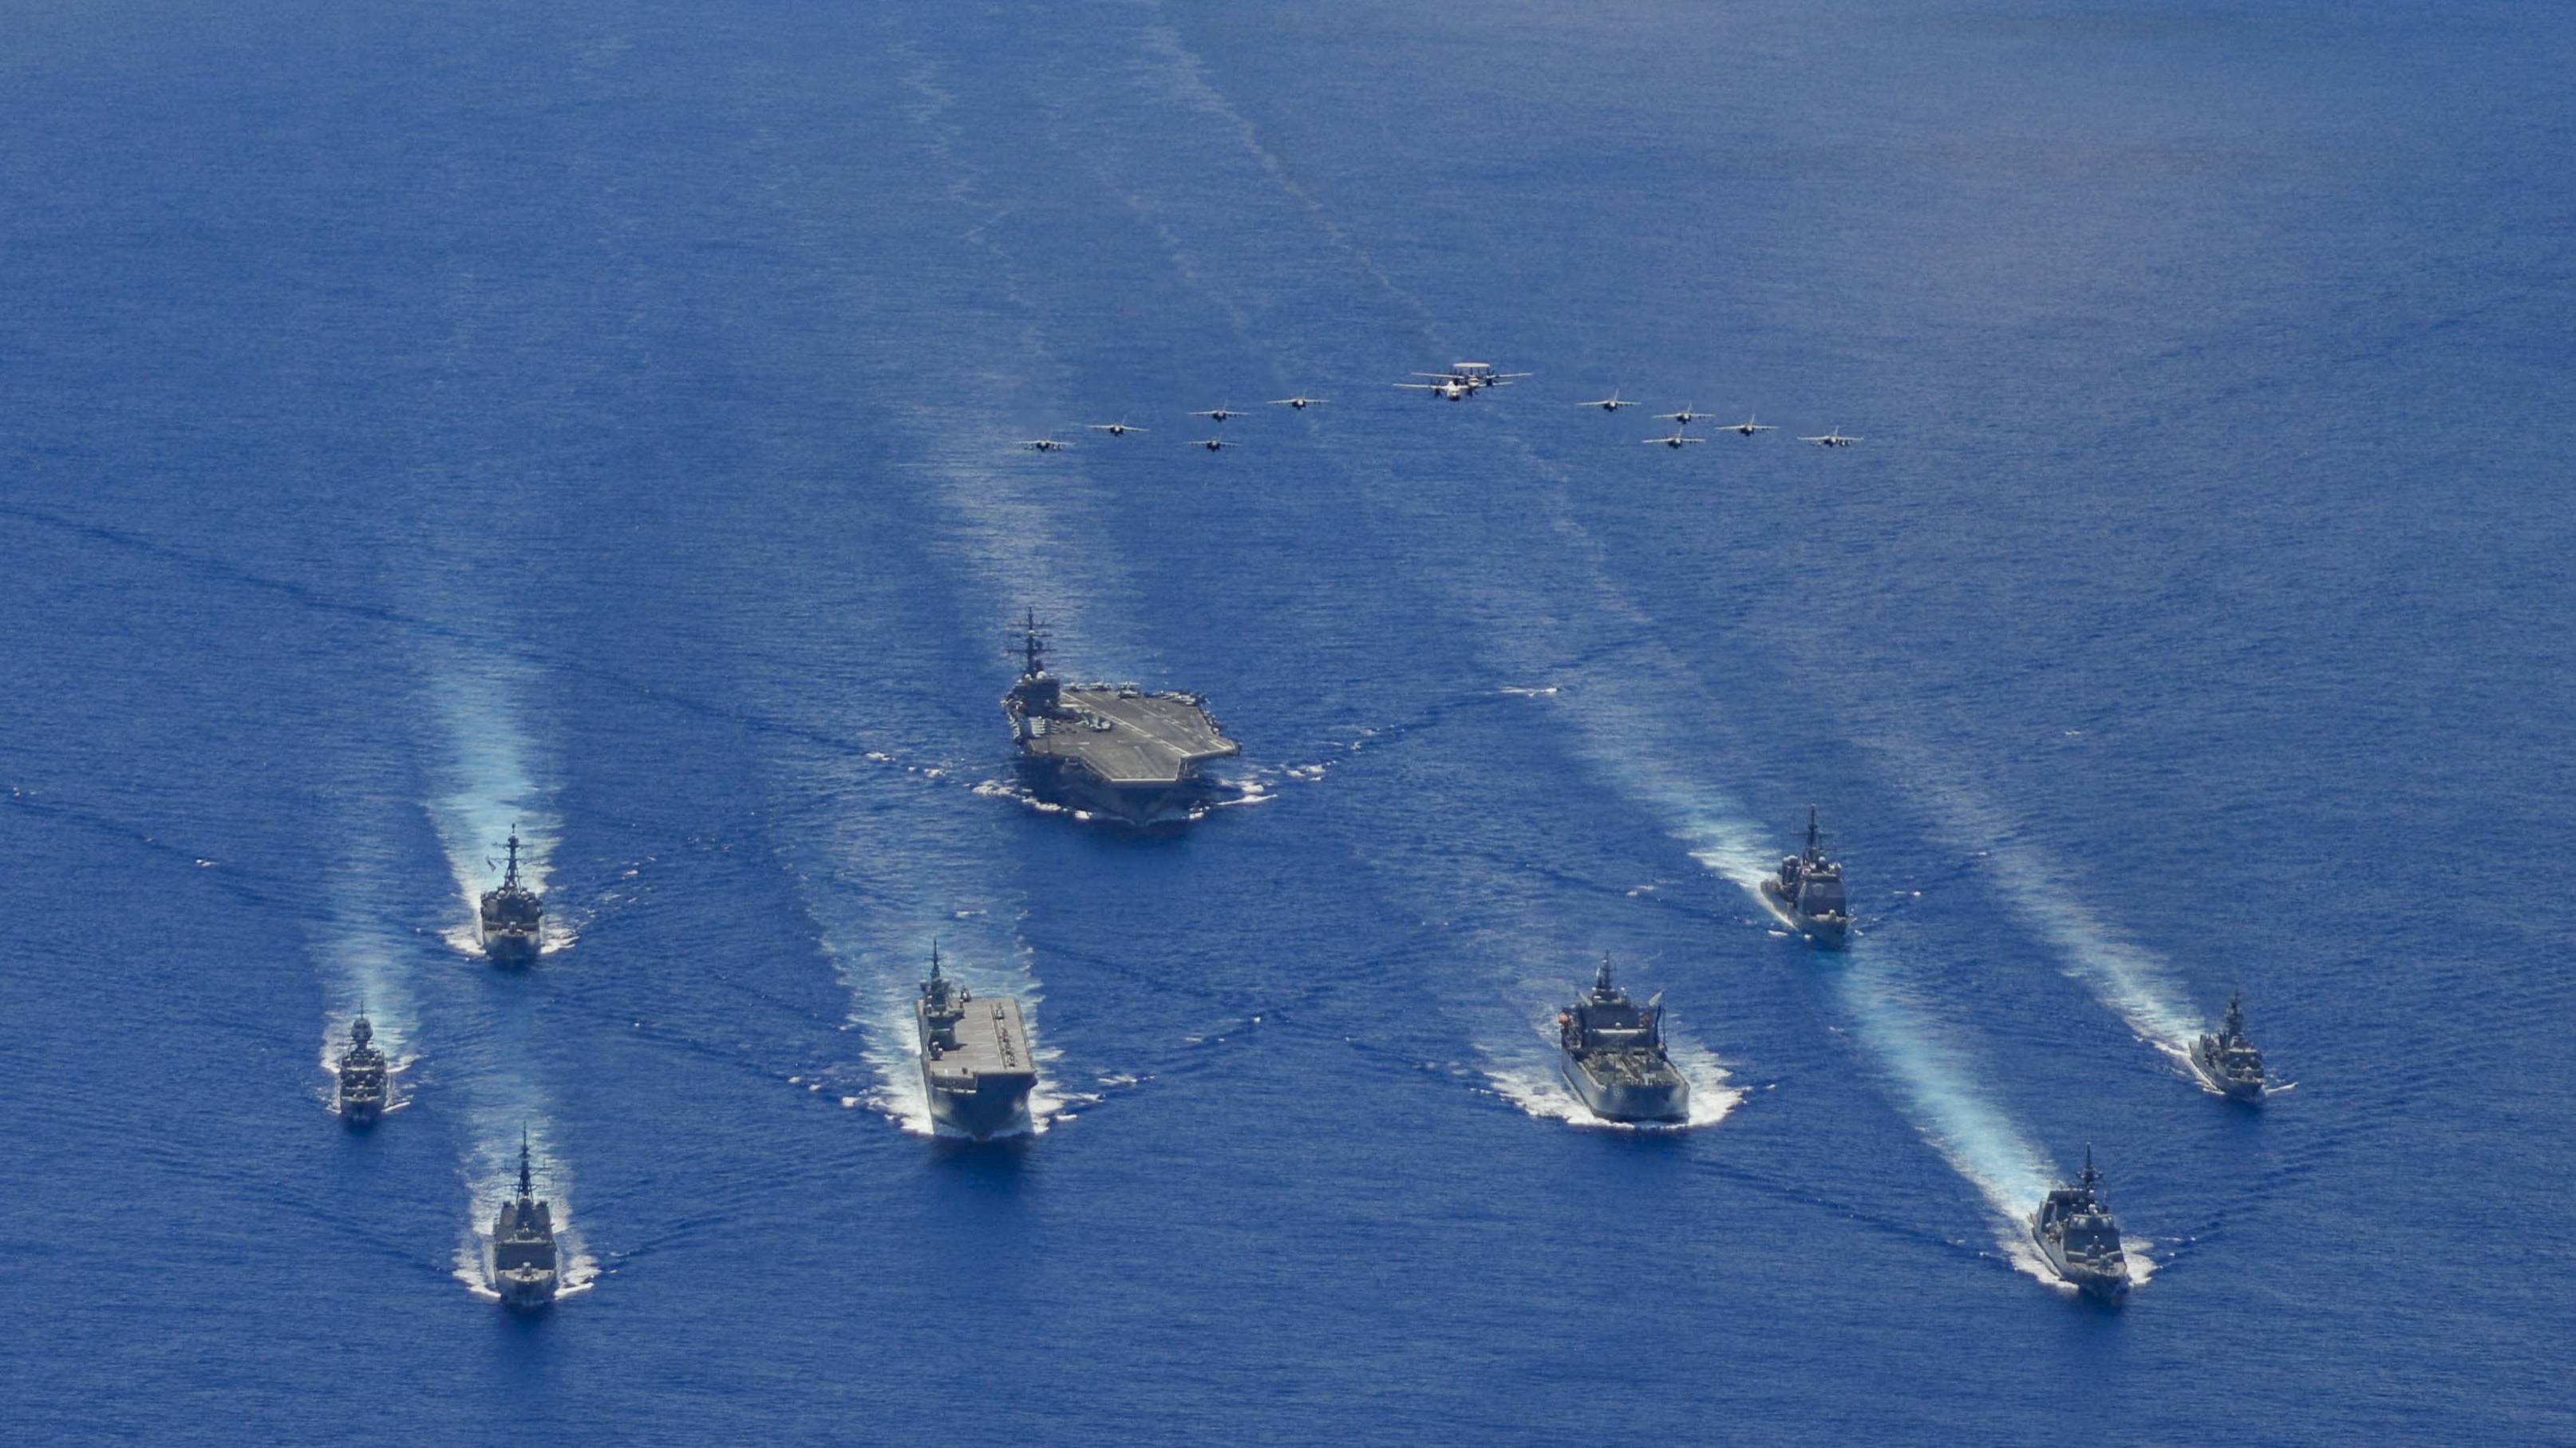 The USS Ronald Reagan Carrier Strike Group and units from the Maritime Self-Defense Force and Australian Defense Force participate in trilateral exercises in the Philippine Sea, on the doorstep of the disputed South China Sea, earlier this week. | U.S. NAVY